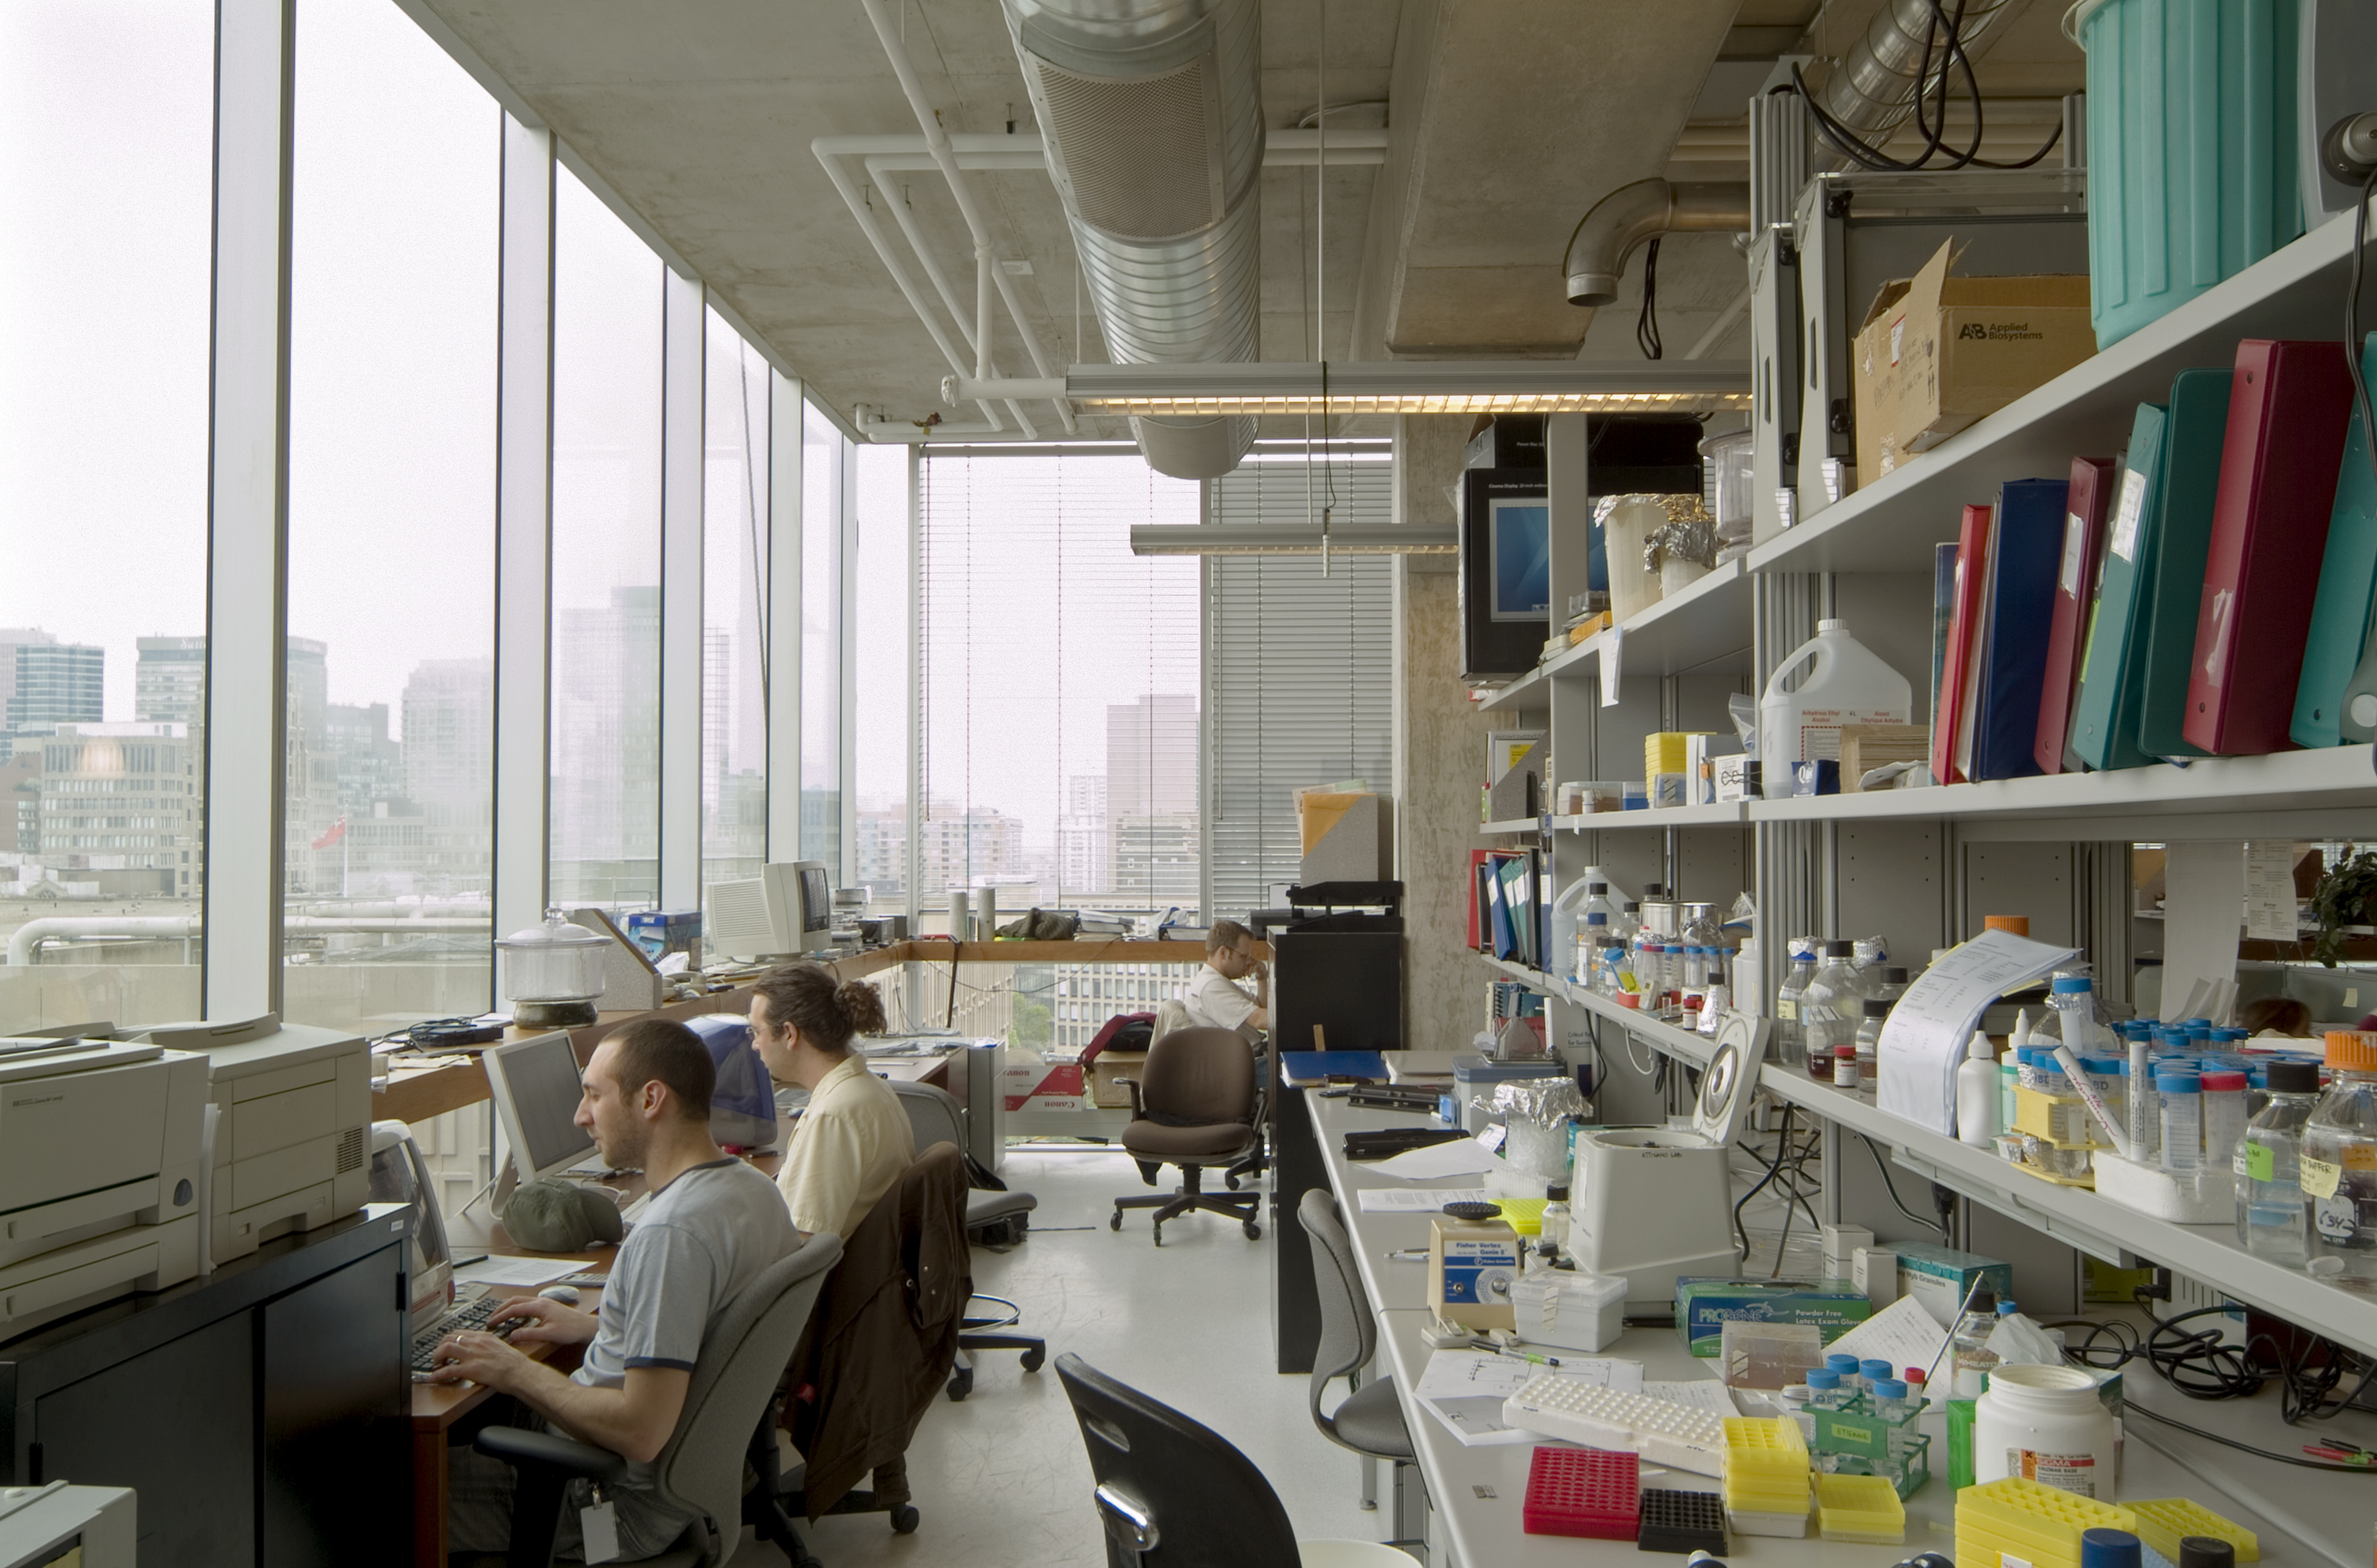 Three researchers sitting at at desks in front of full height curtain wall windows that wrap around a corner. Behind them are tables and shelves full of lab equipment and books.										